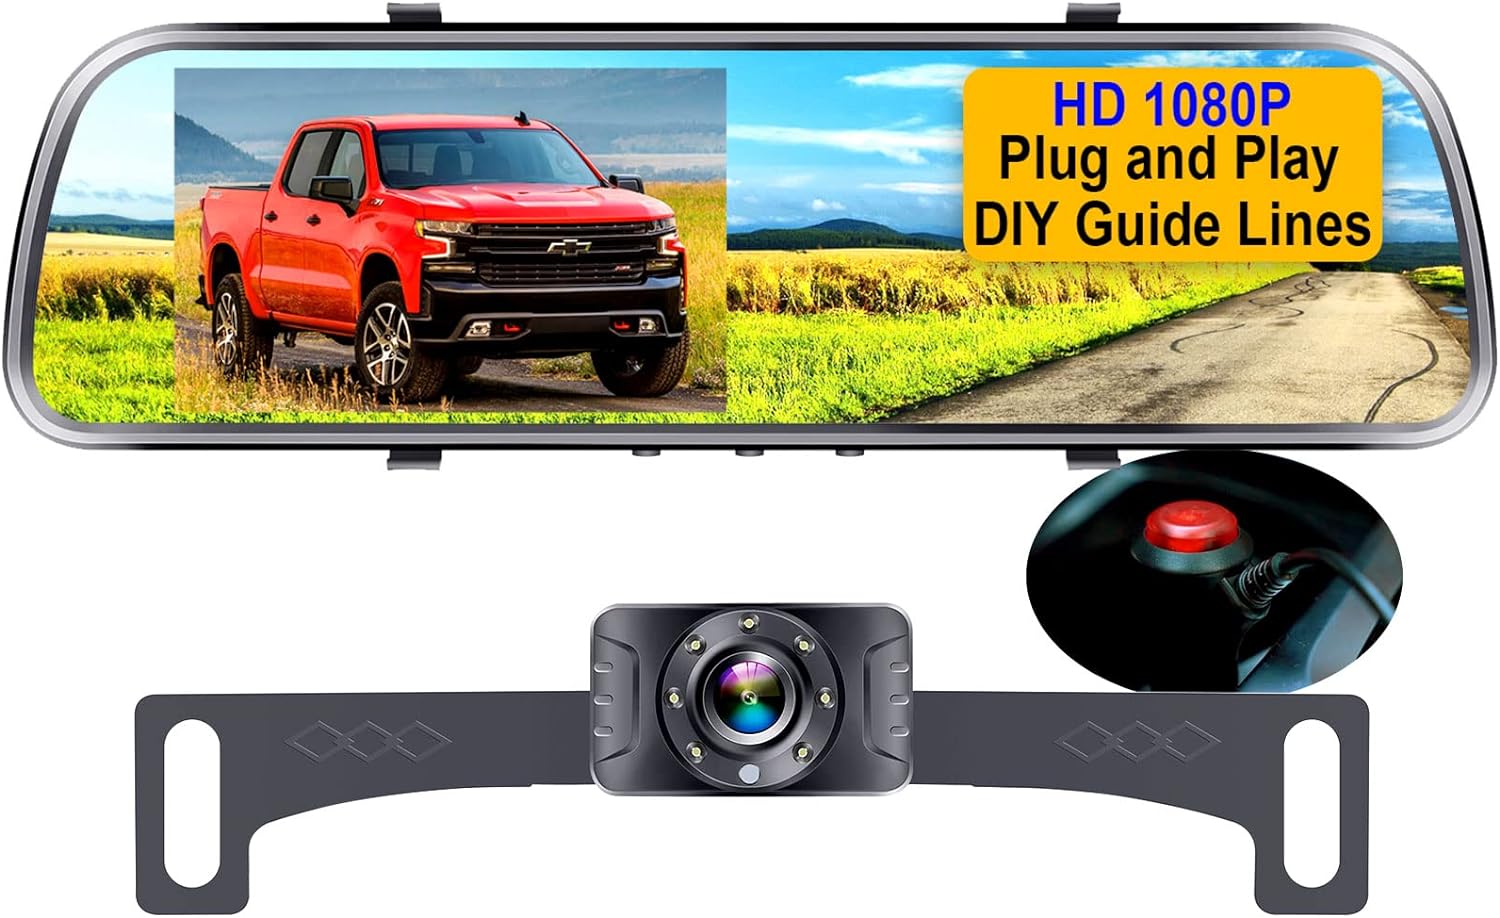 AMTIFO Backup Camera Mirror HD 1080P - Plug and Play Easy Set up Color Night Vision Rear View Mirror with License Plate Camera for Car Truck SUV Waterproof DIY Guide Lines A1